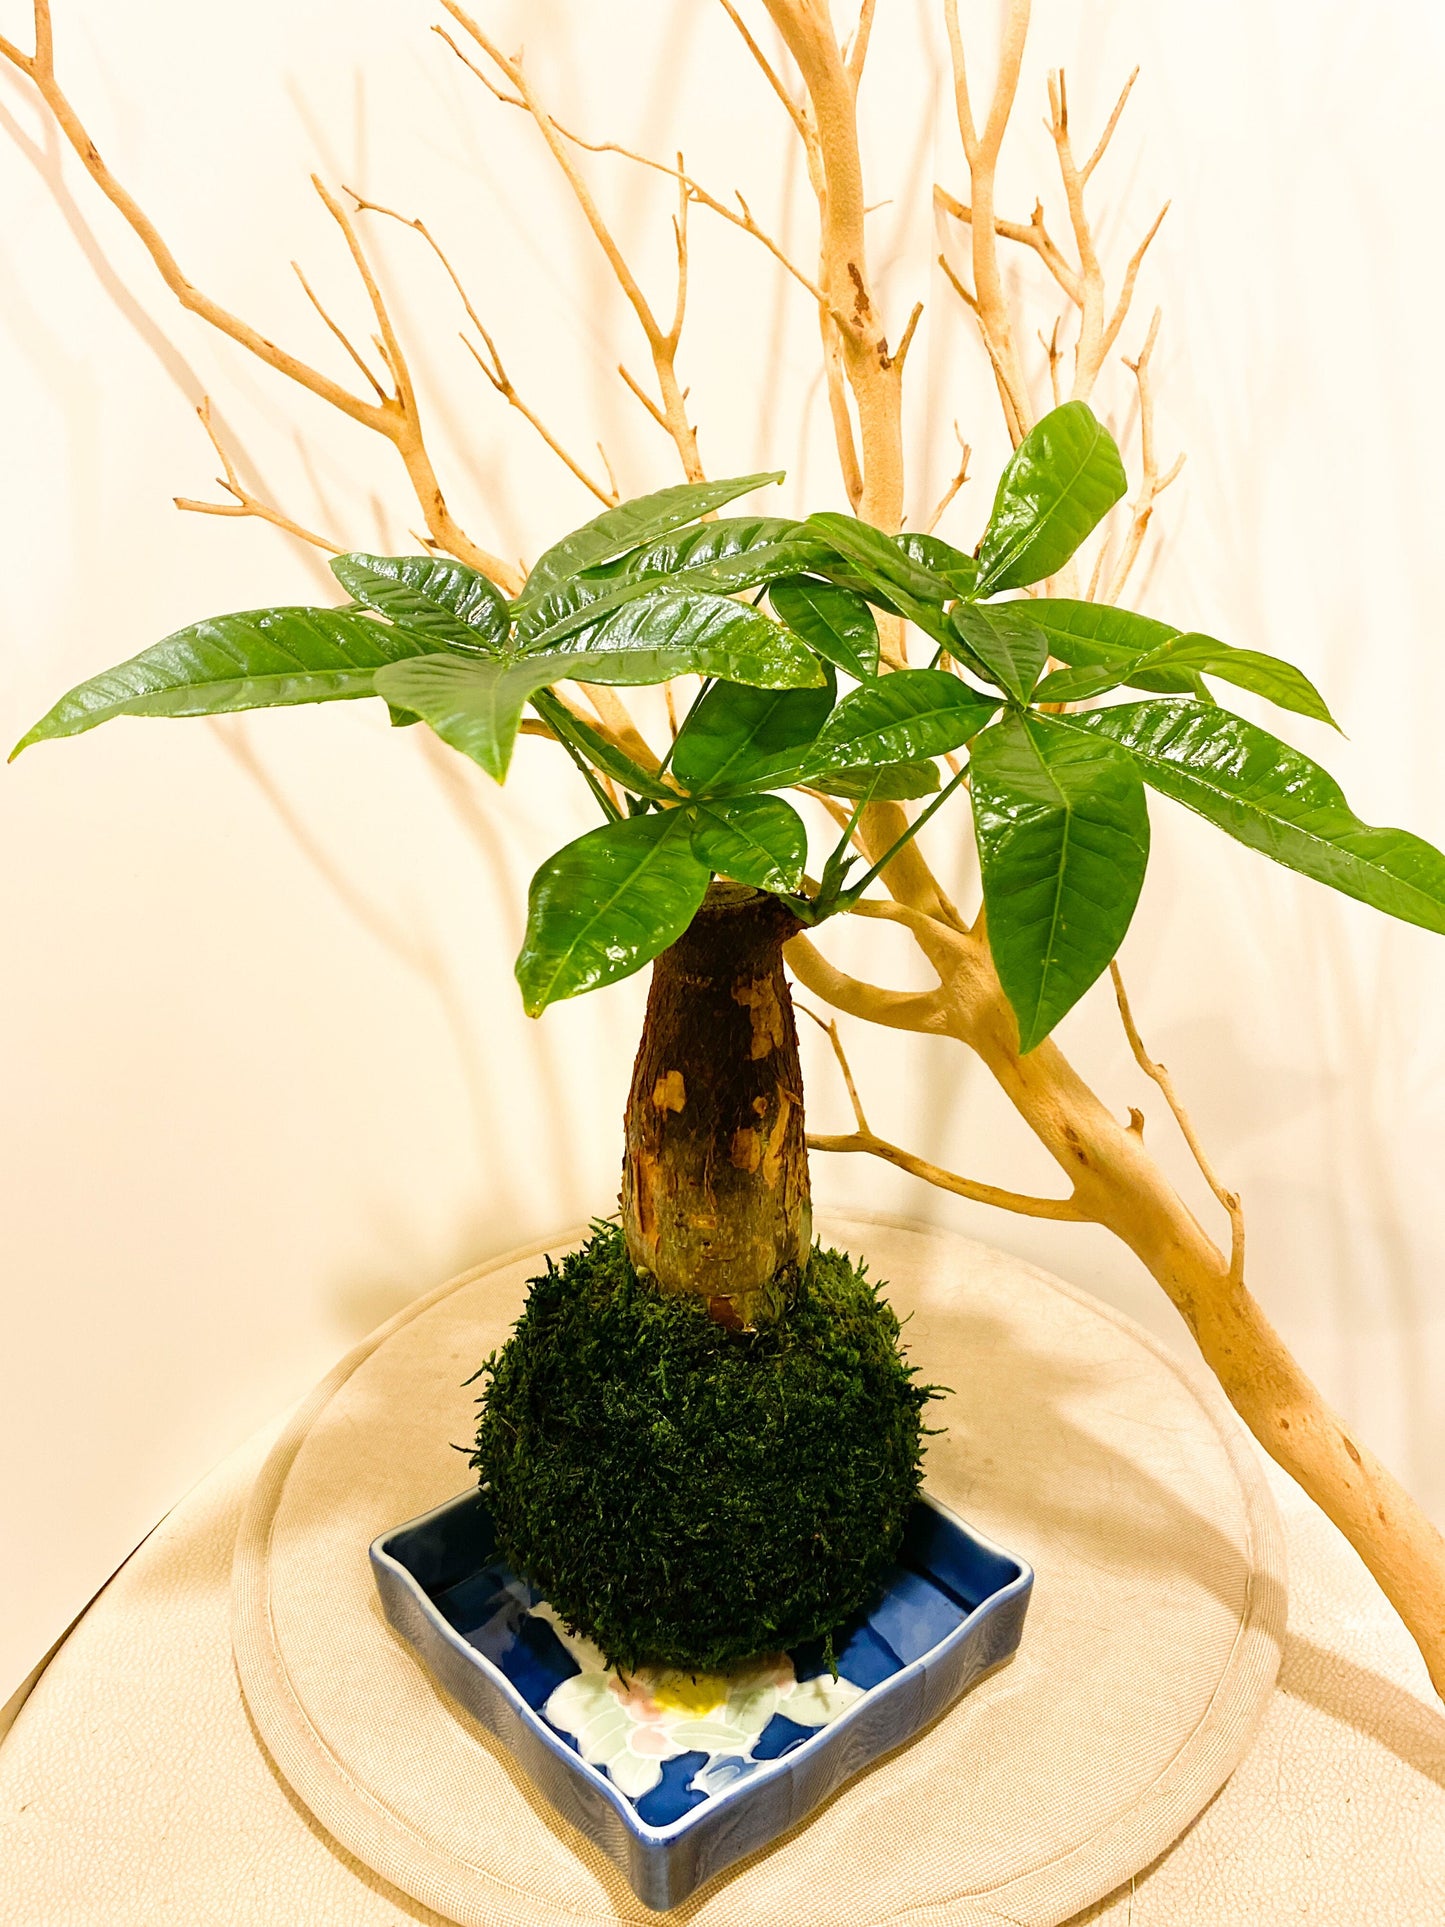 Limited!! One Trunk Money Tree, Pachira Kokedama - Moss ball, Feng Sui Lucky Plant, Bring you prosperity.